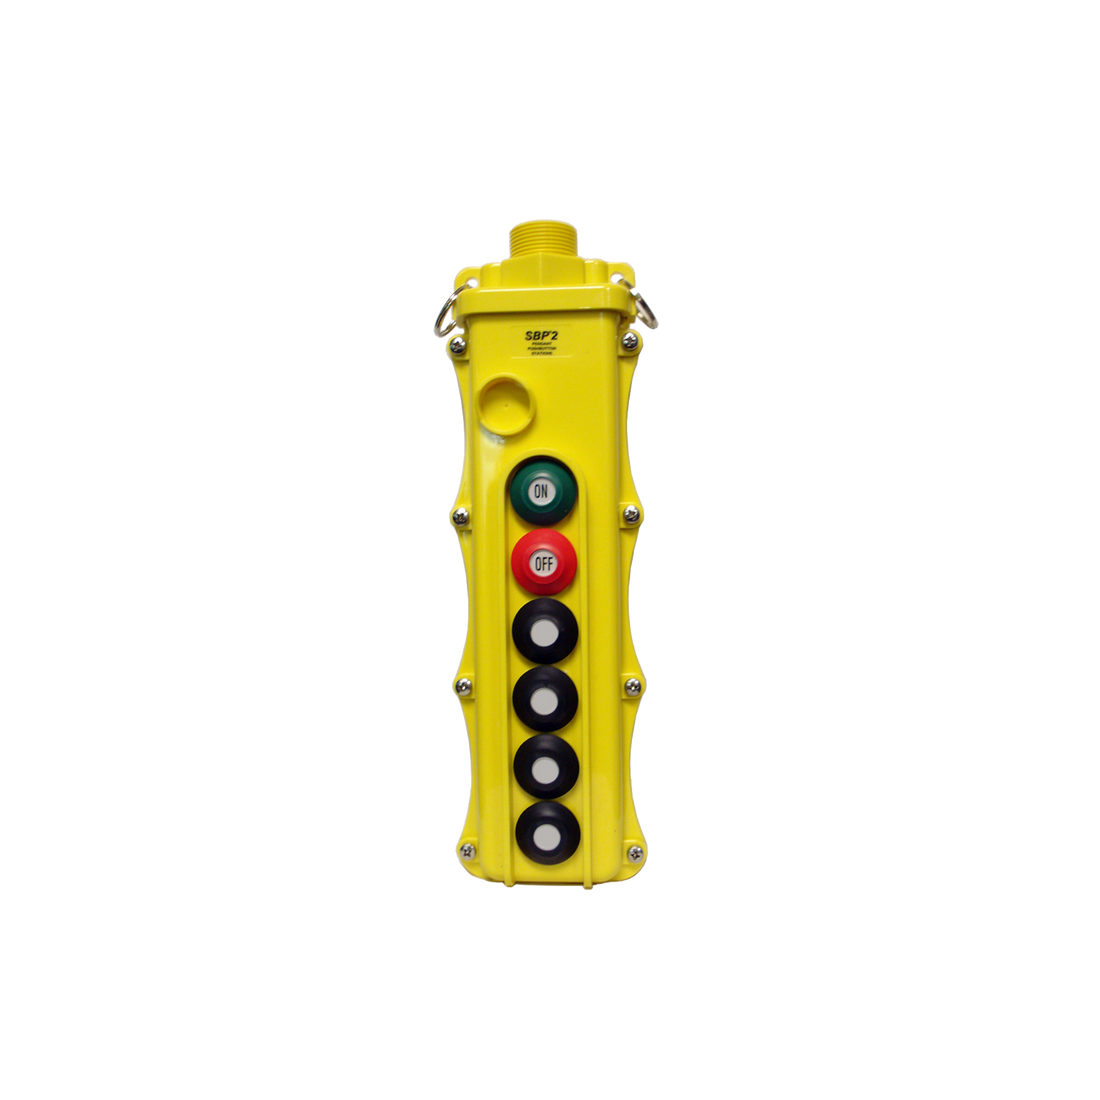 6-Button Pendant, Maintained On/Off, Single, Two, Three-Speed (SBP2-6-WH,-WHS,-WHT) Yellow